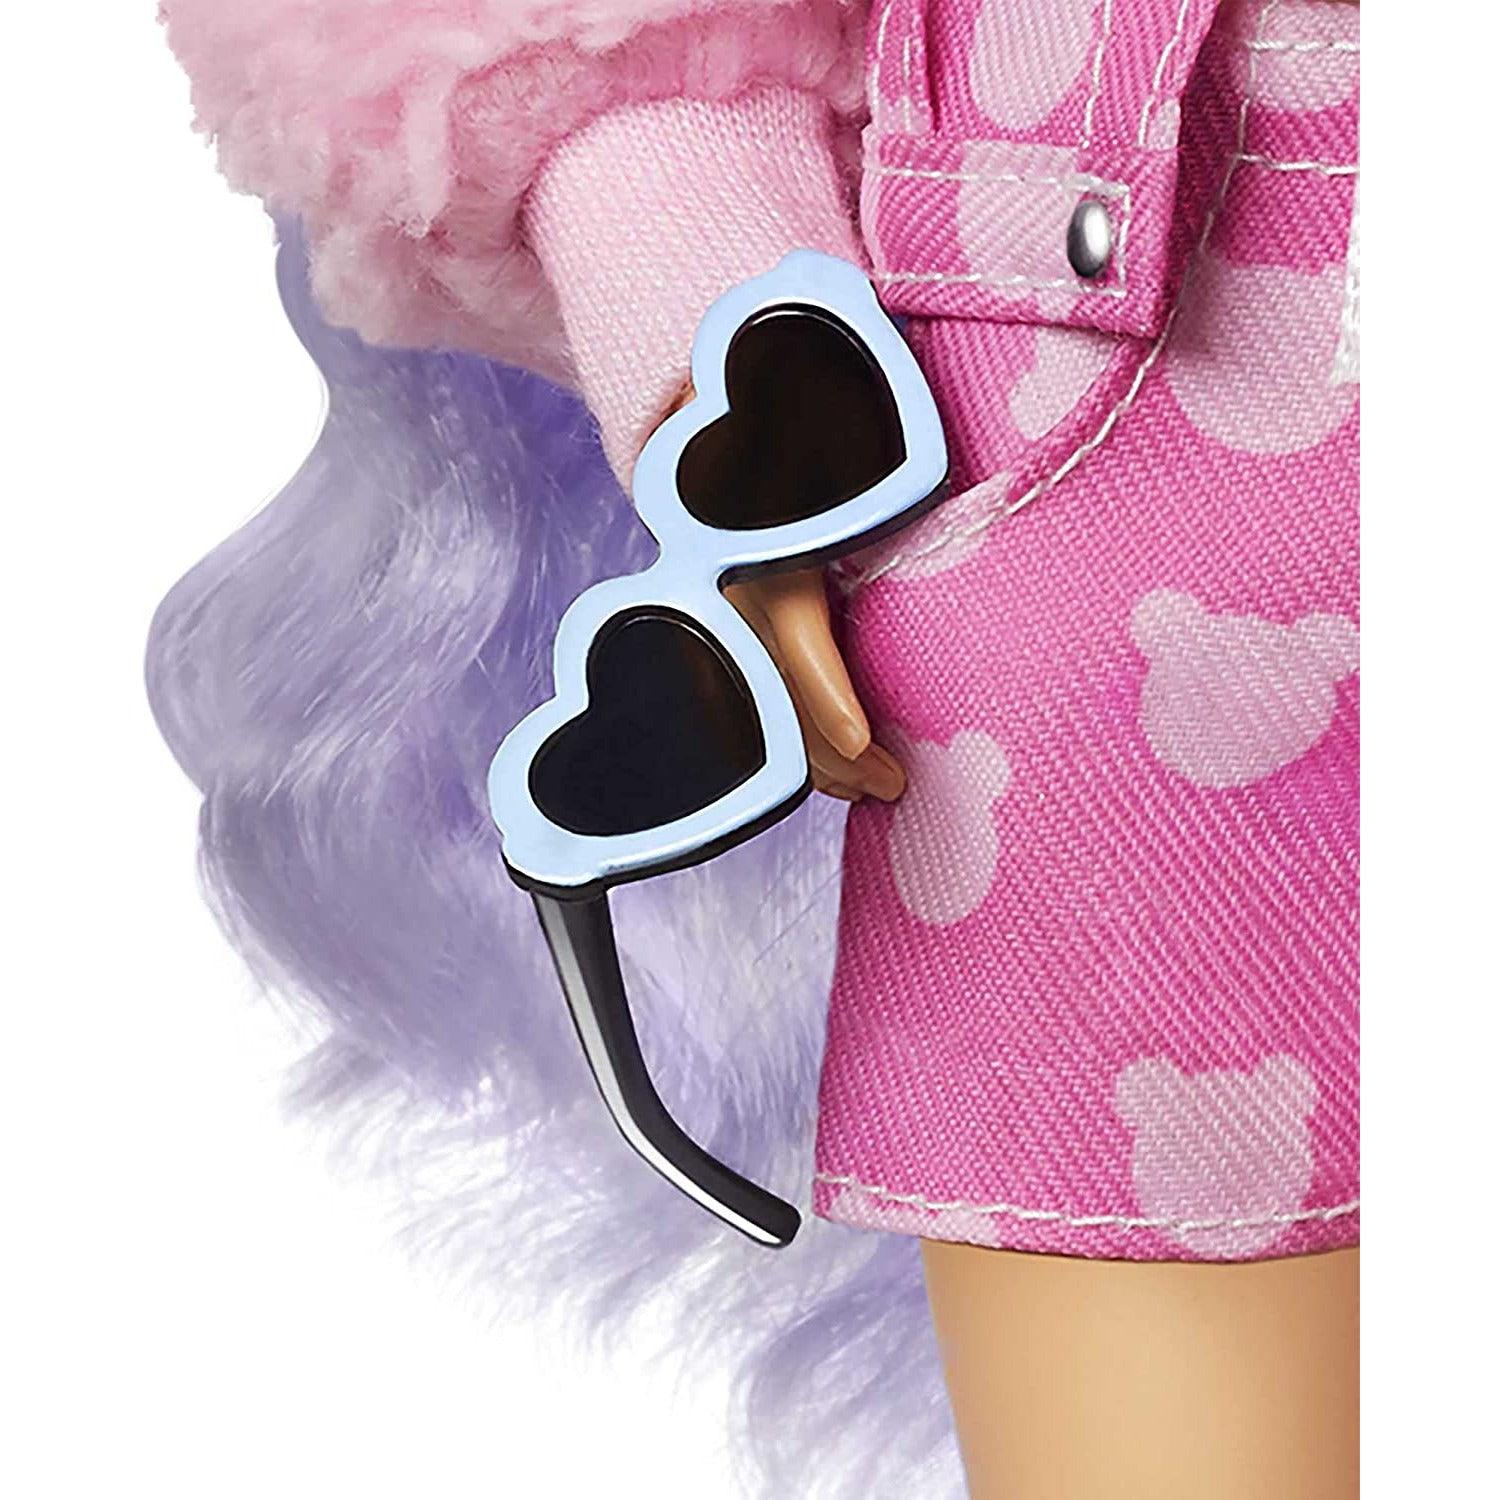 Barbie Extra Doll #6 & Accessories with Long Periwinkle Hair, Teddy Bear-Print Denim Jacket, Matching Shorts & Pet Puppy